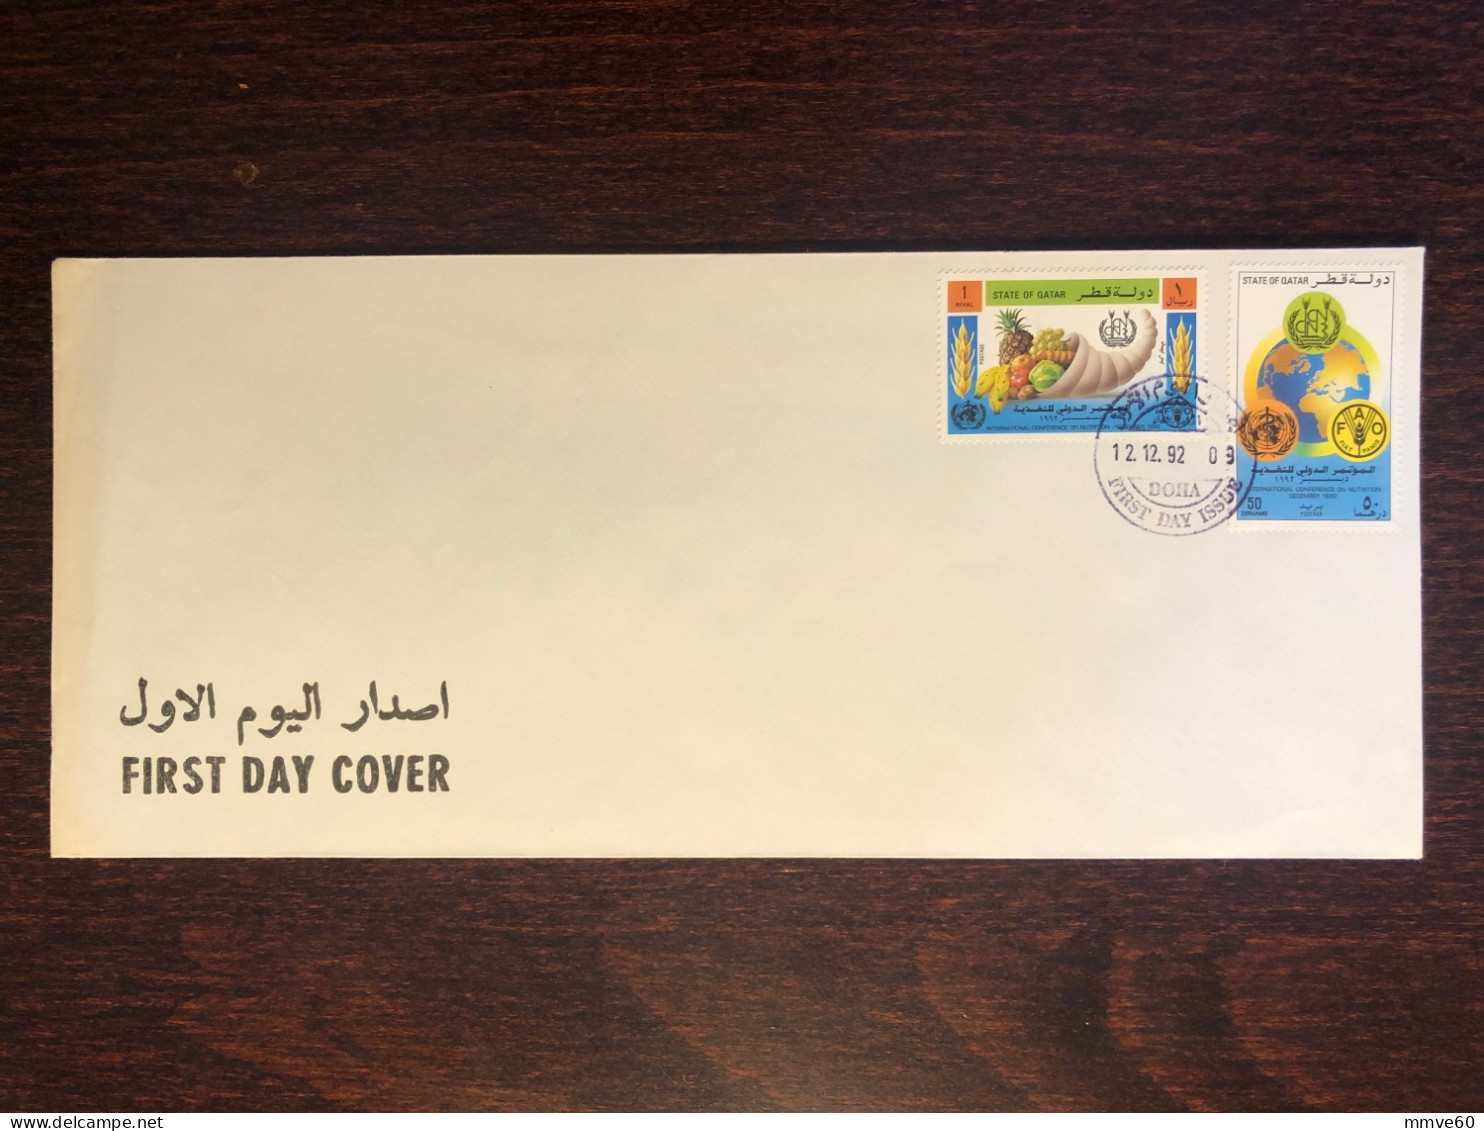 QATAR FDC COVER 1992 YEAR NUTRITIONS WHO FAO HEALTH MEDICINE STAMPS - Qatar